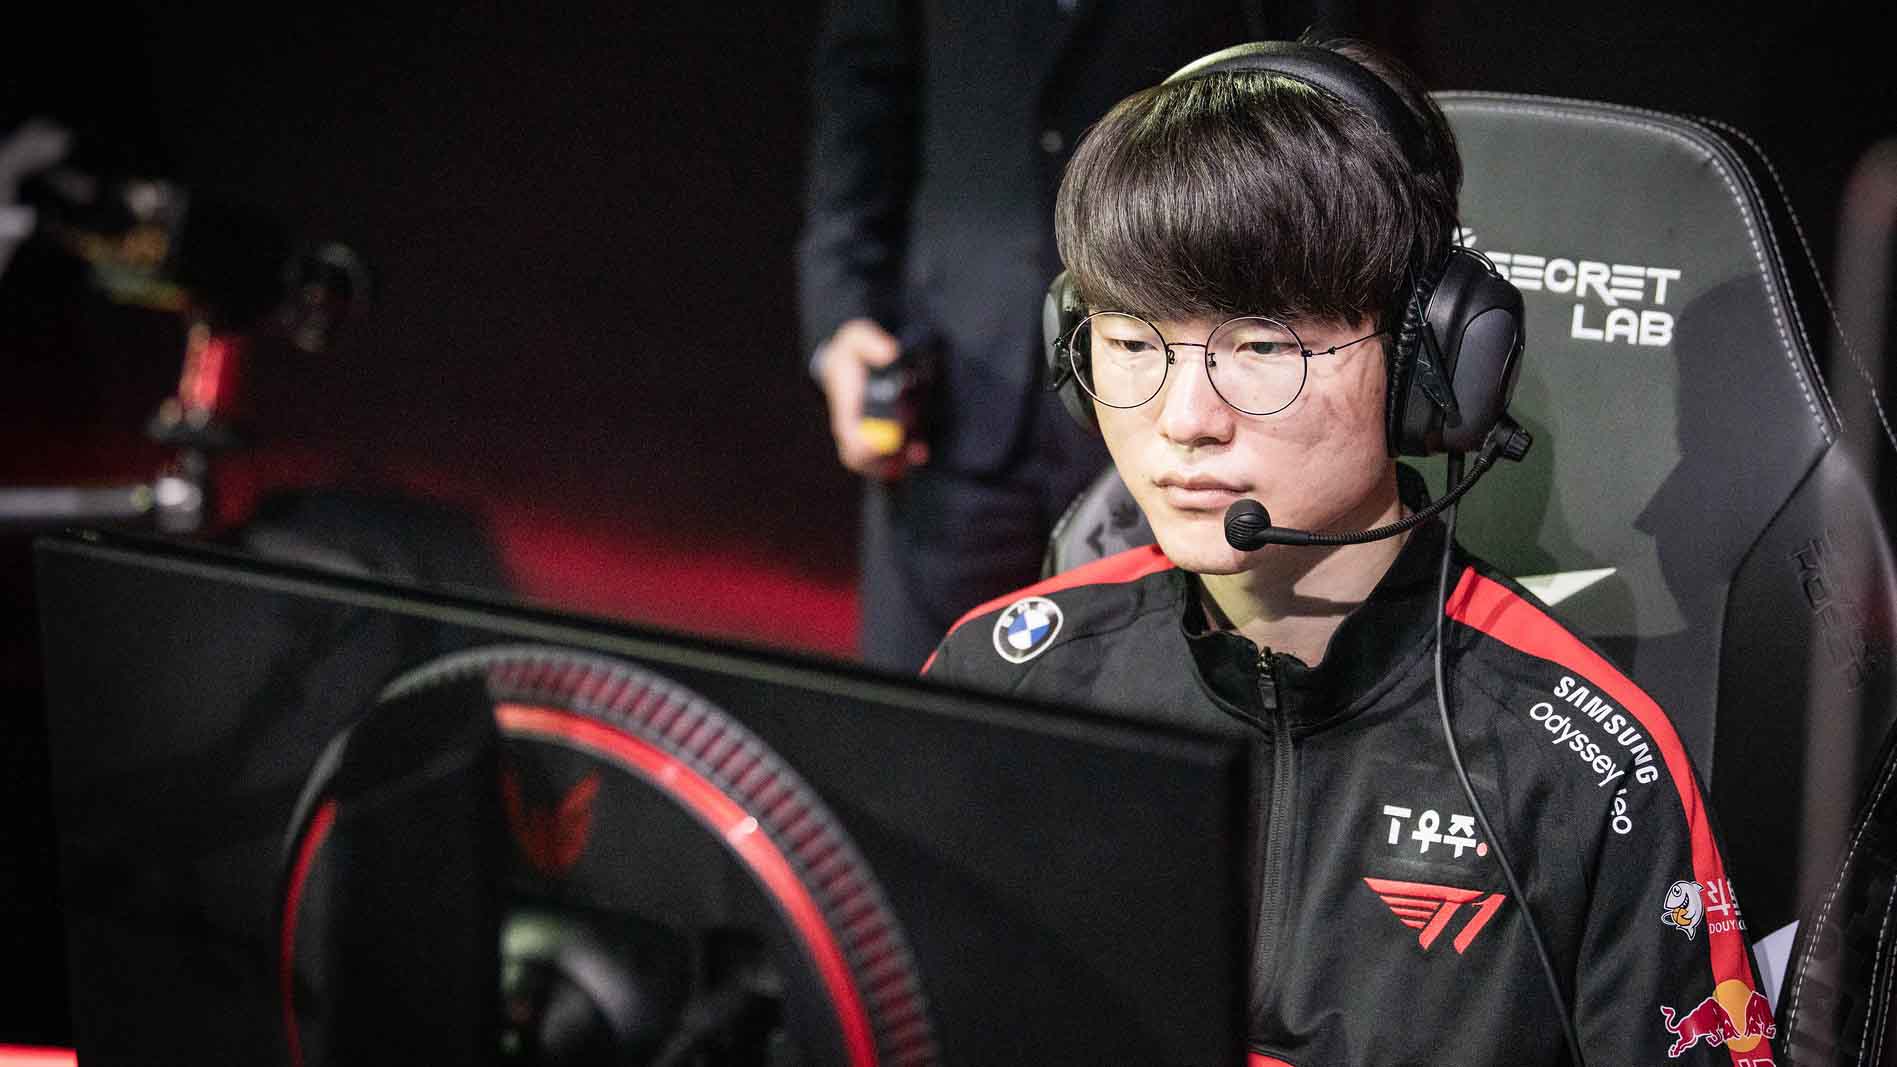 T1 Faker: After I win the finals, I'll choose a game that chat likes and  try to beat it on stream. - Inven Global